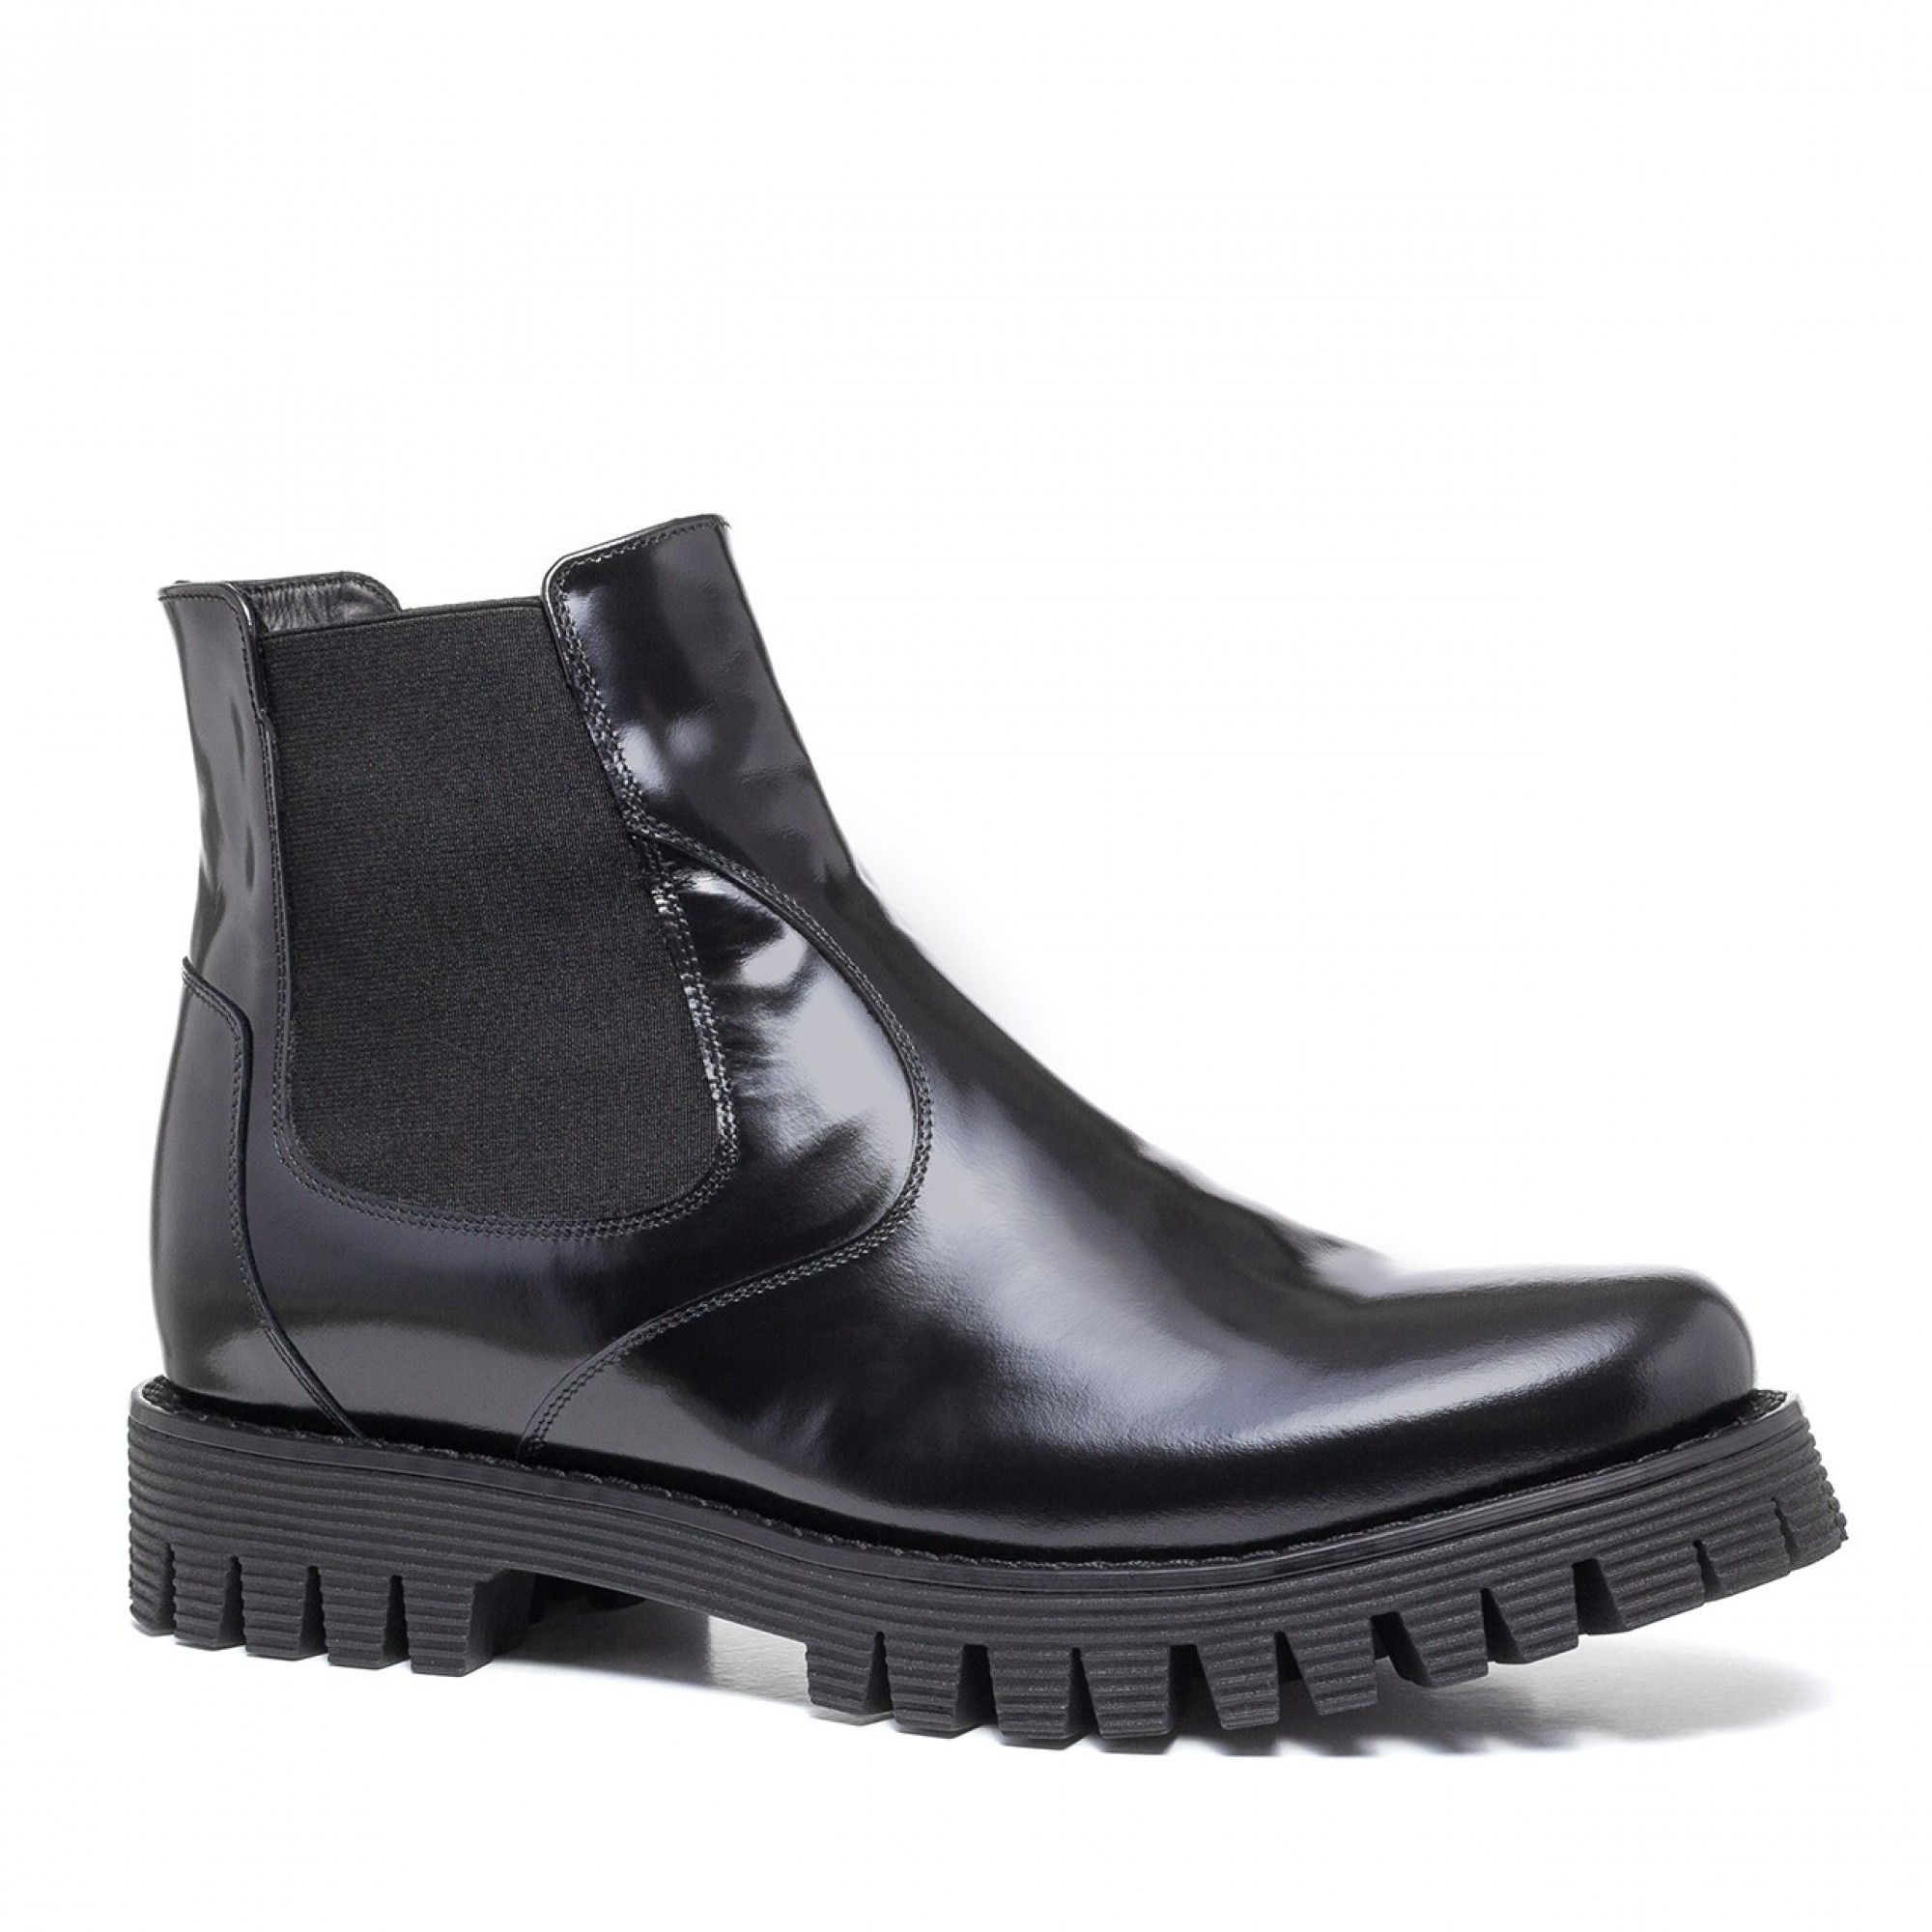 Central Area - Elevator Boots in Brushed Leather from 2.4 to 4 inches